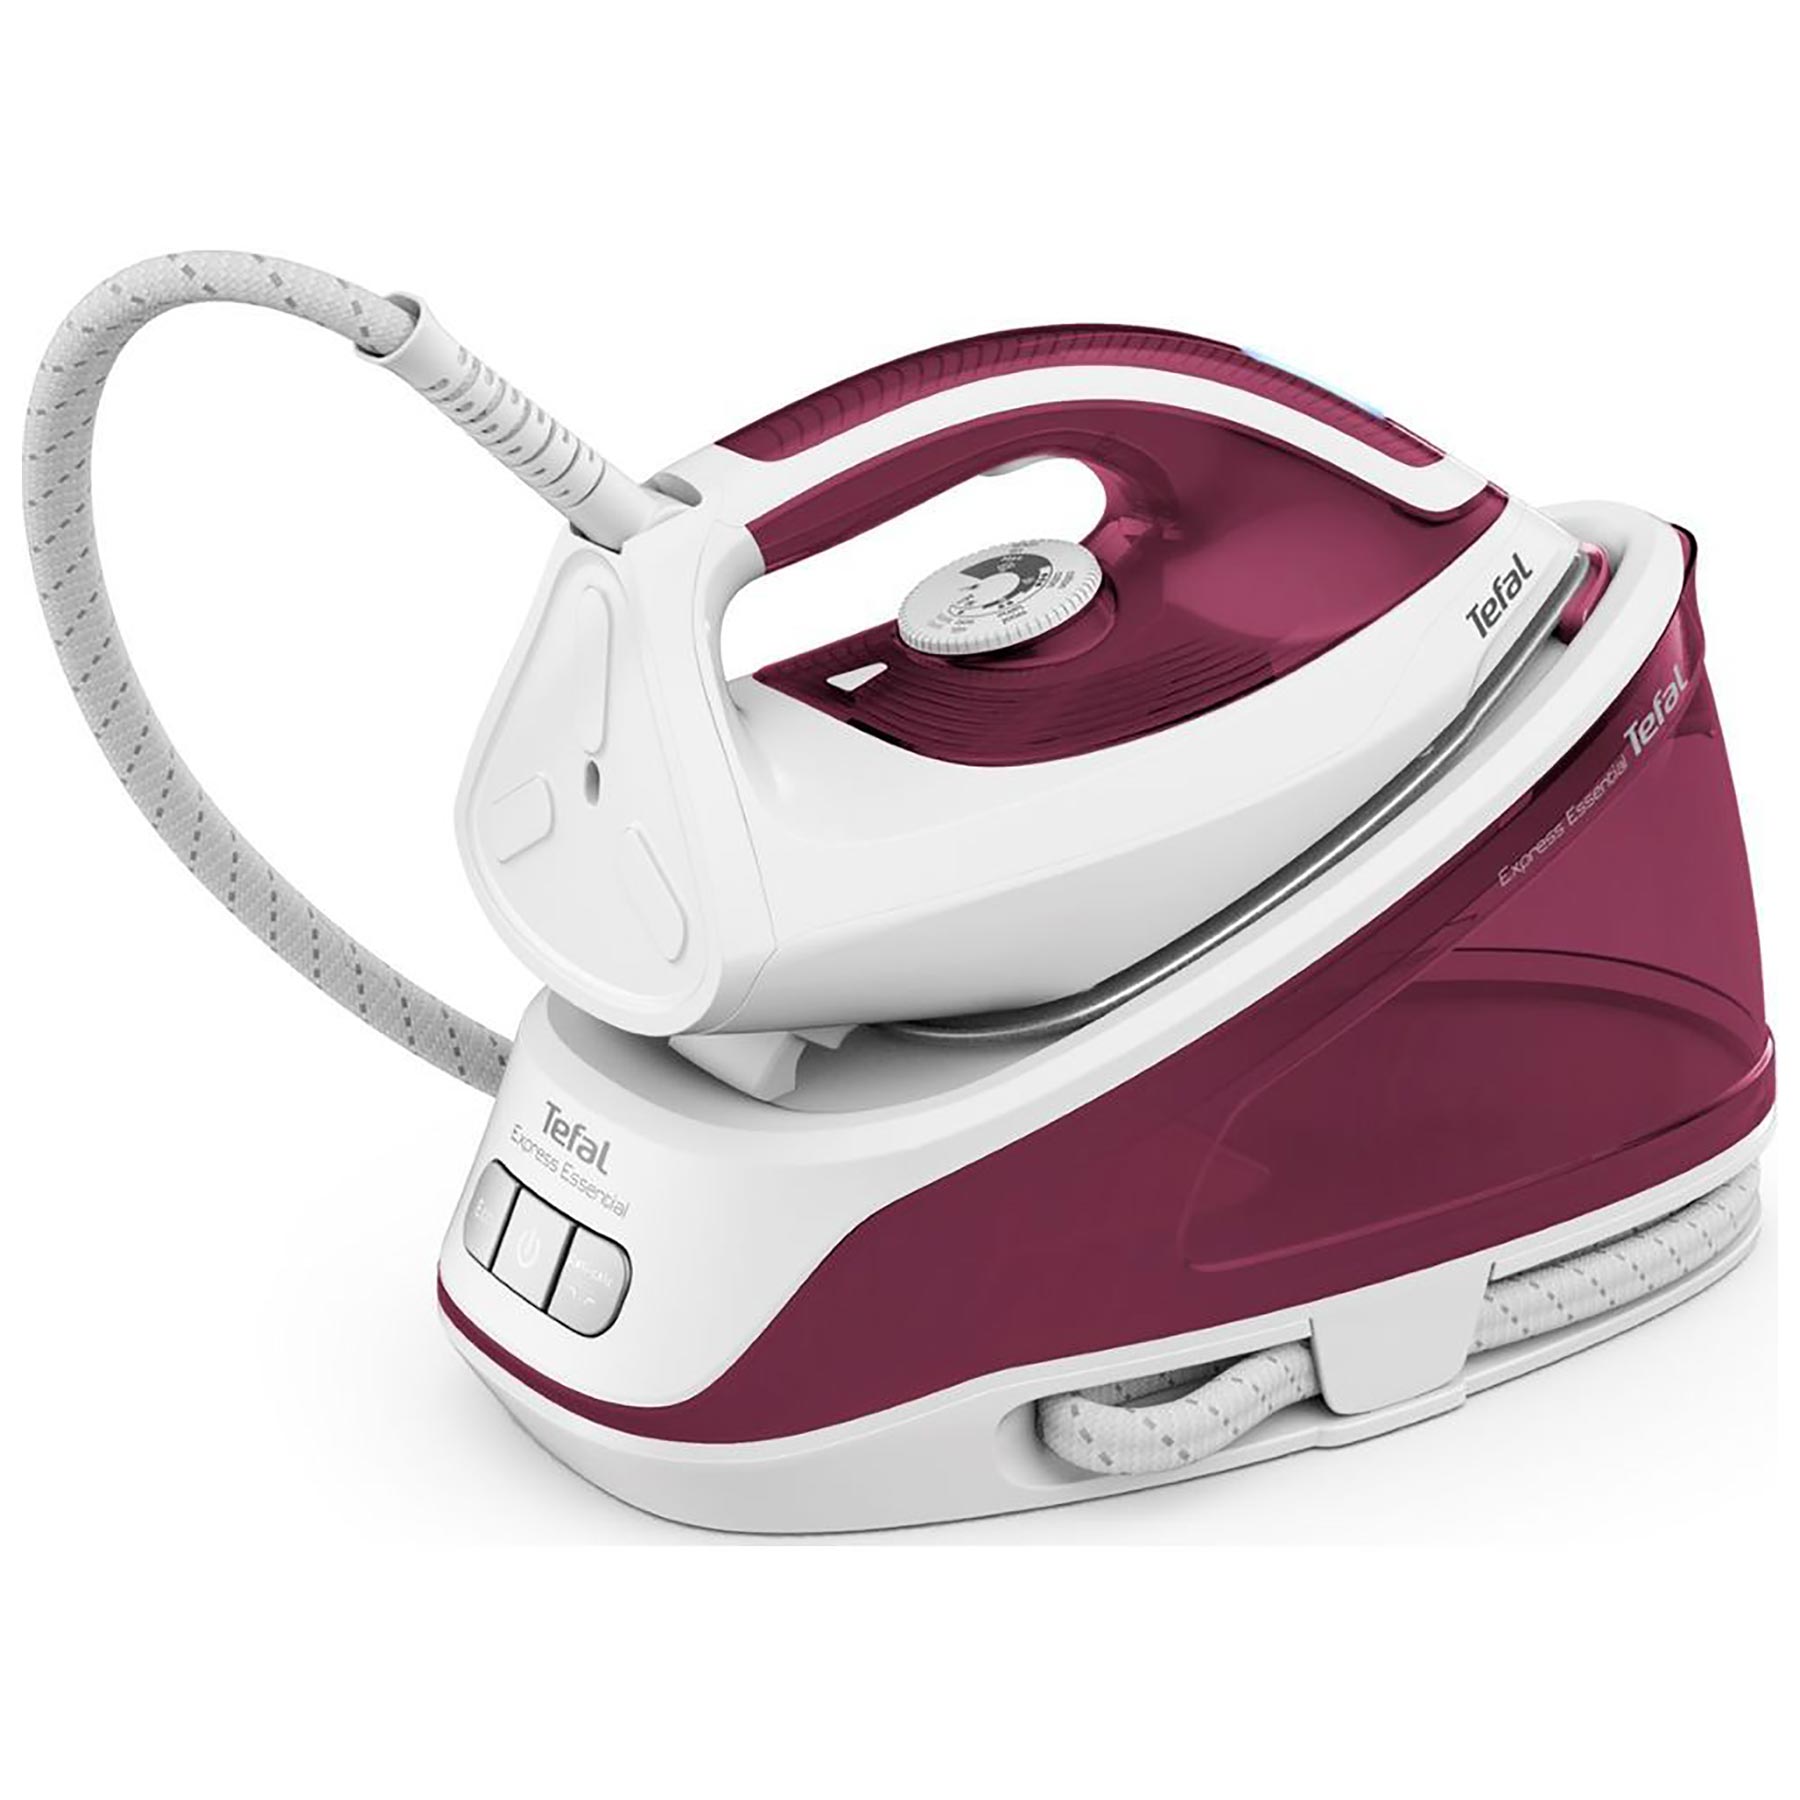 Image of Tefal SV6110G0 Express Essential Steam Generator Iron 5 bar